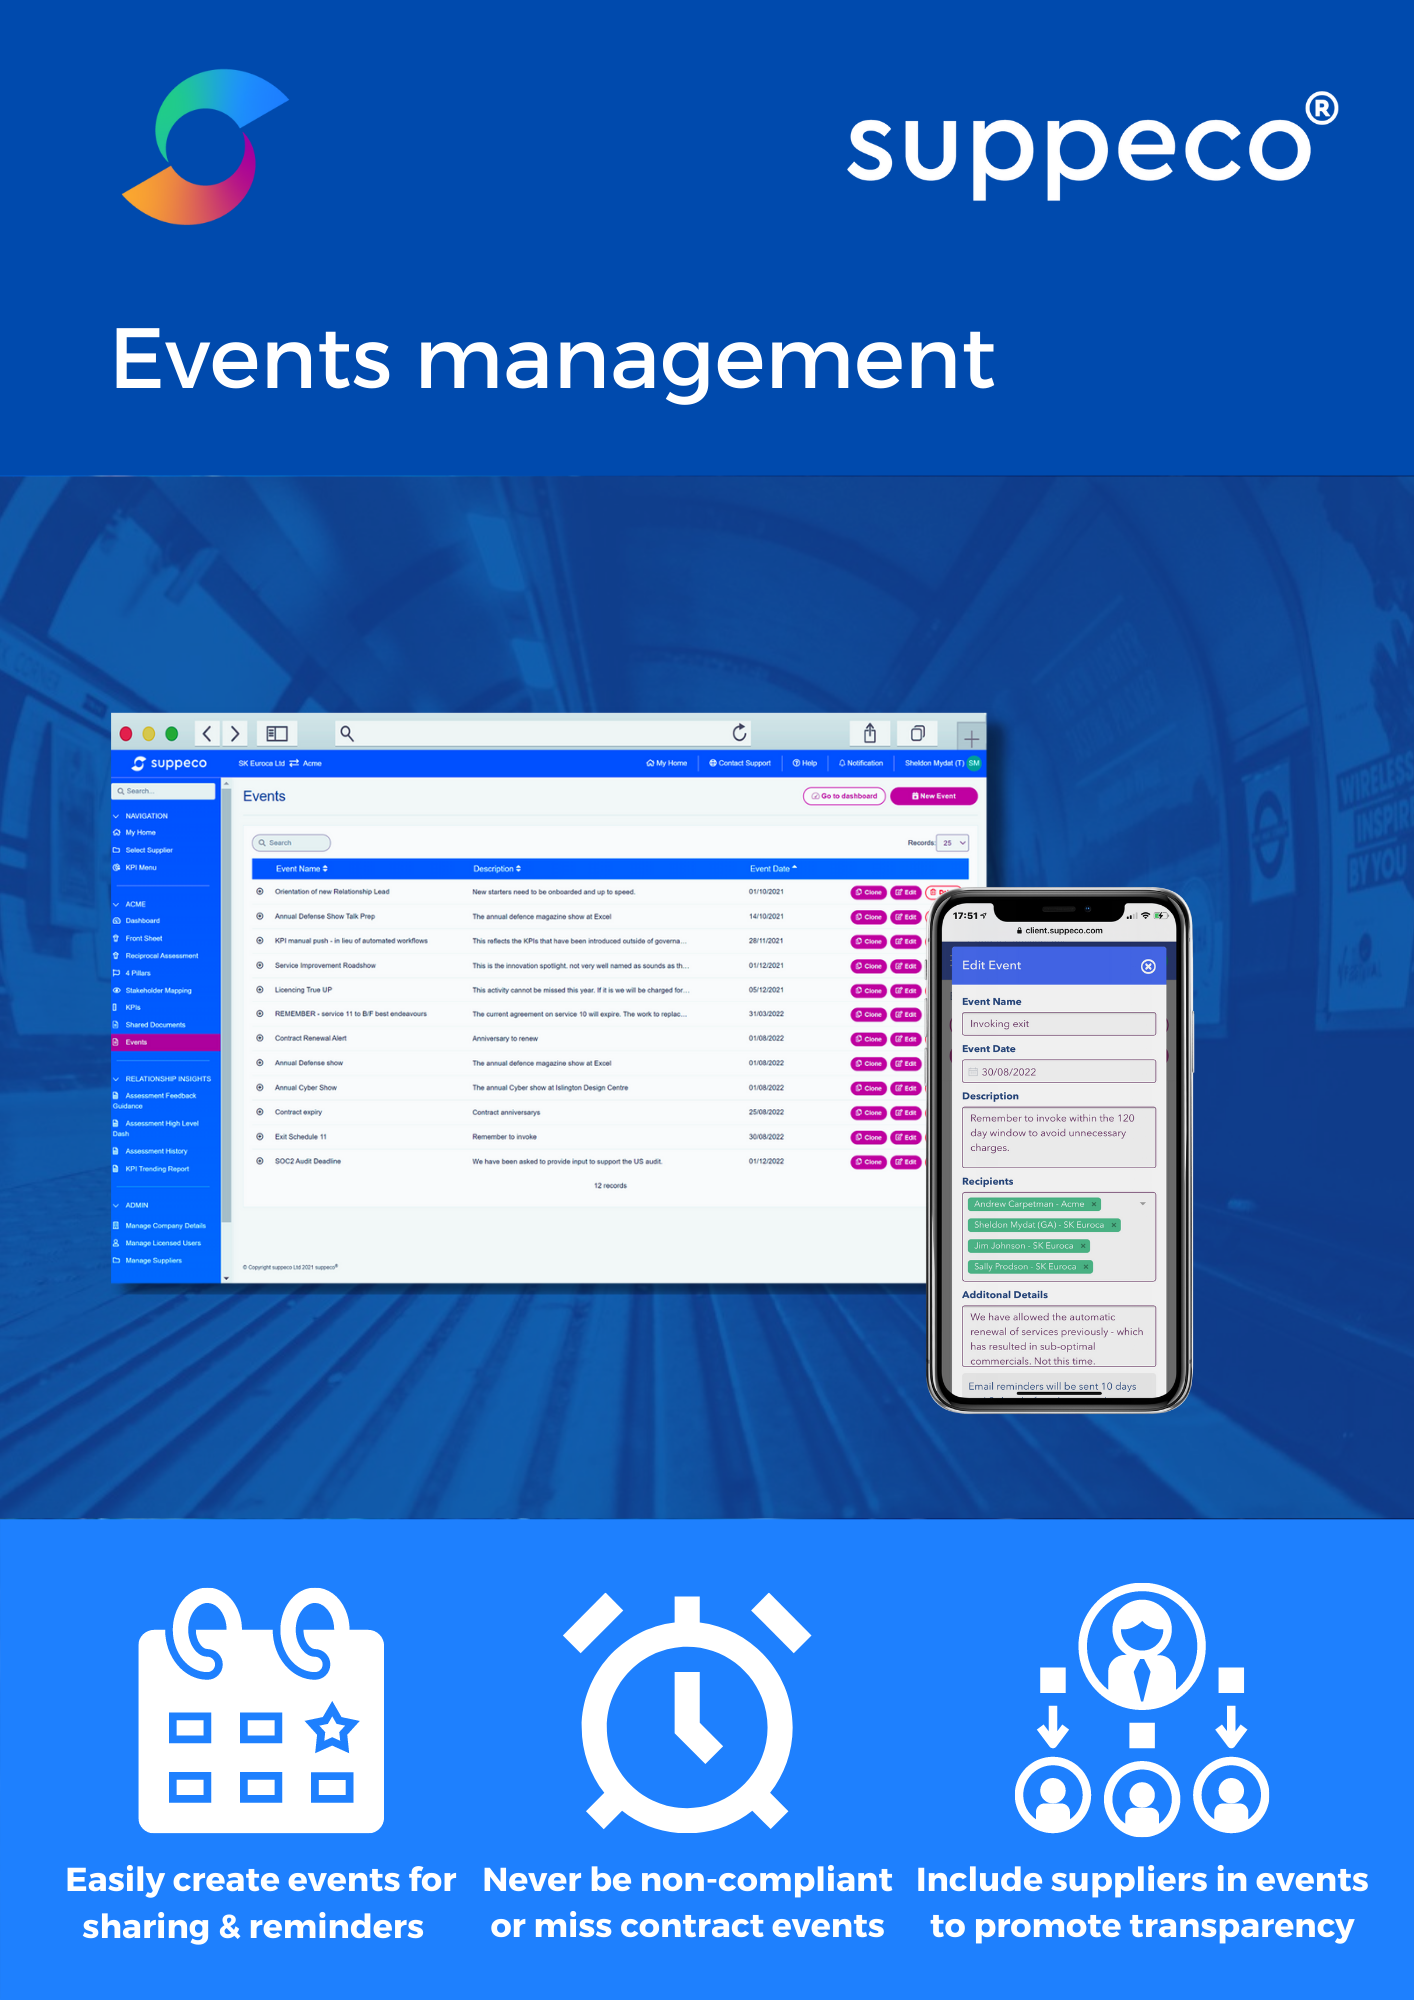 Contract and audit compliance management. Easily create and share events for sharing and reminders. Never be non-compliant or miss contract events. Include suppliers in events to promote transparency.